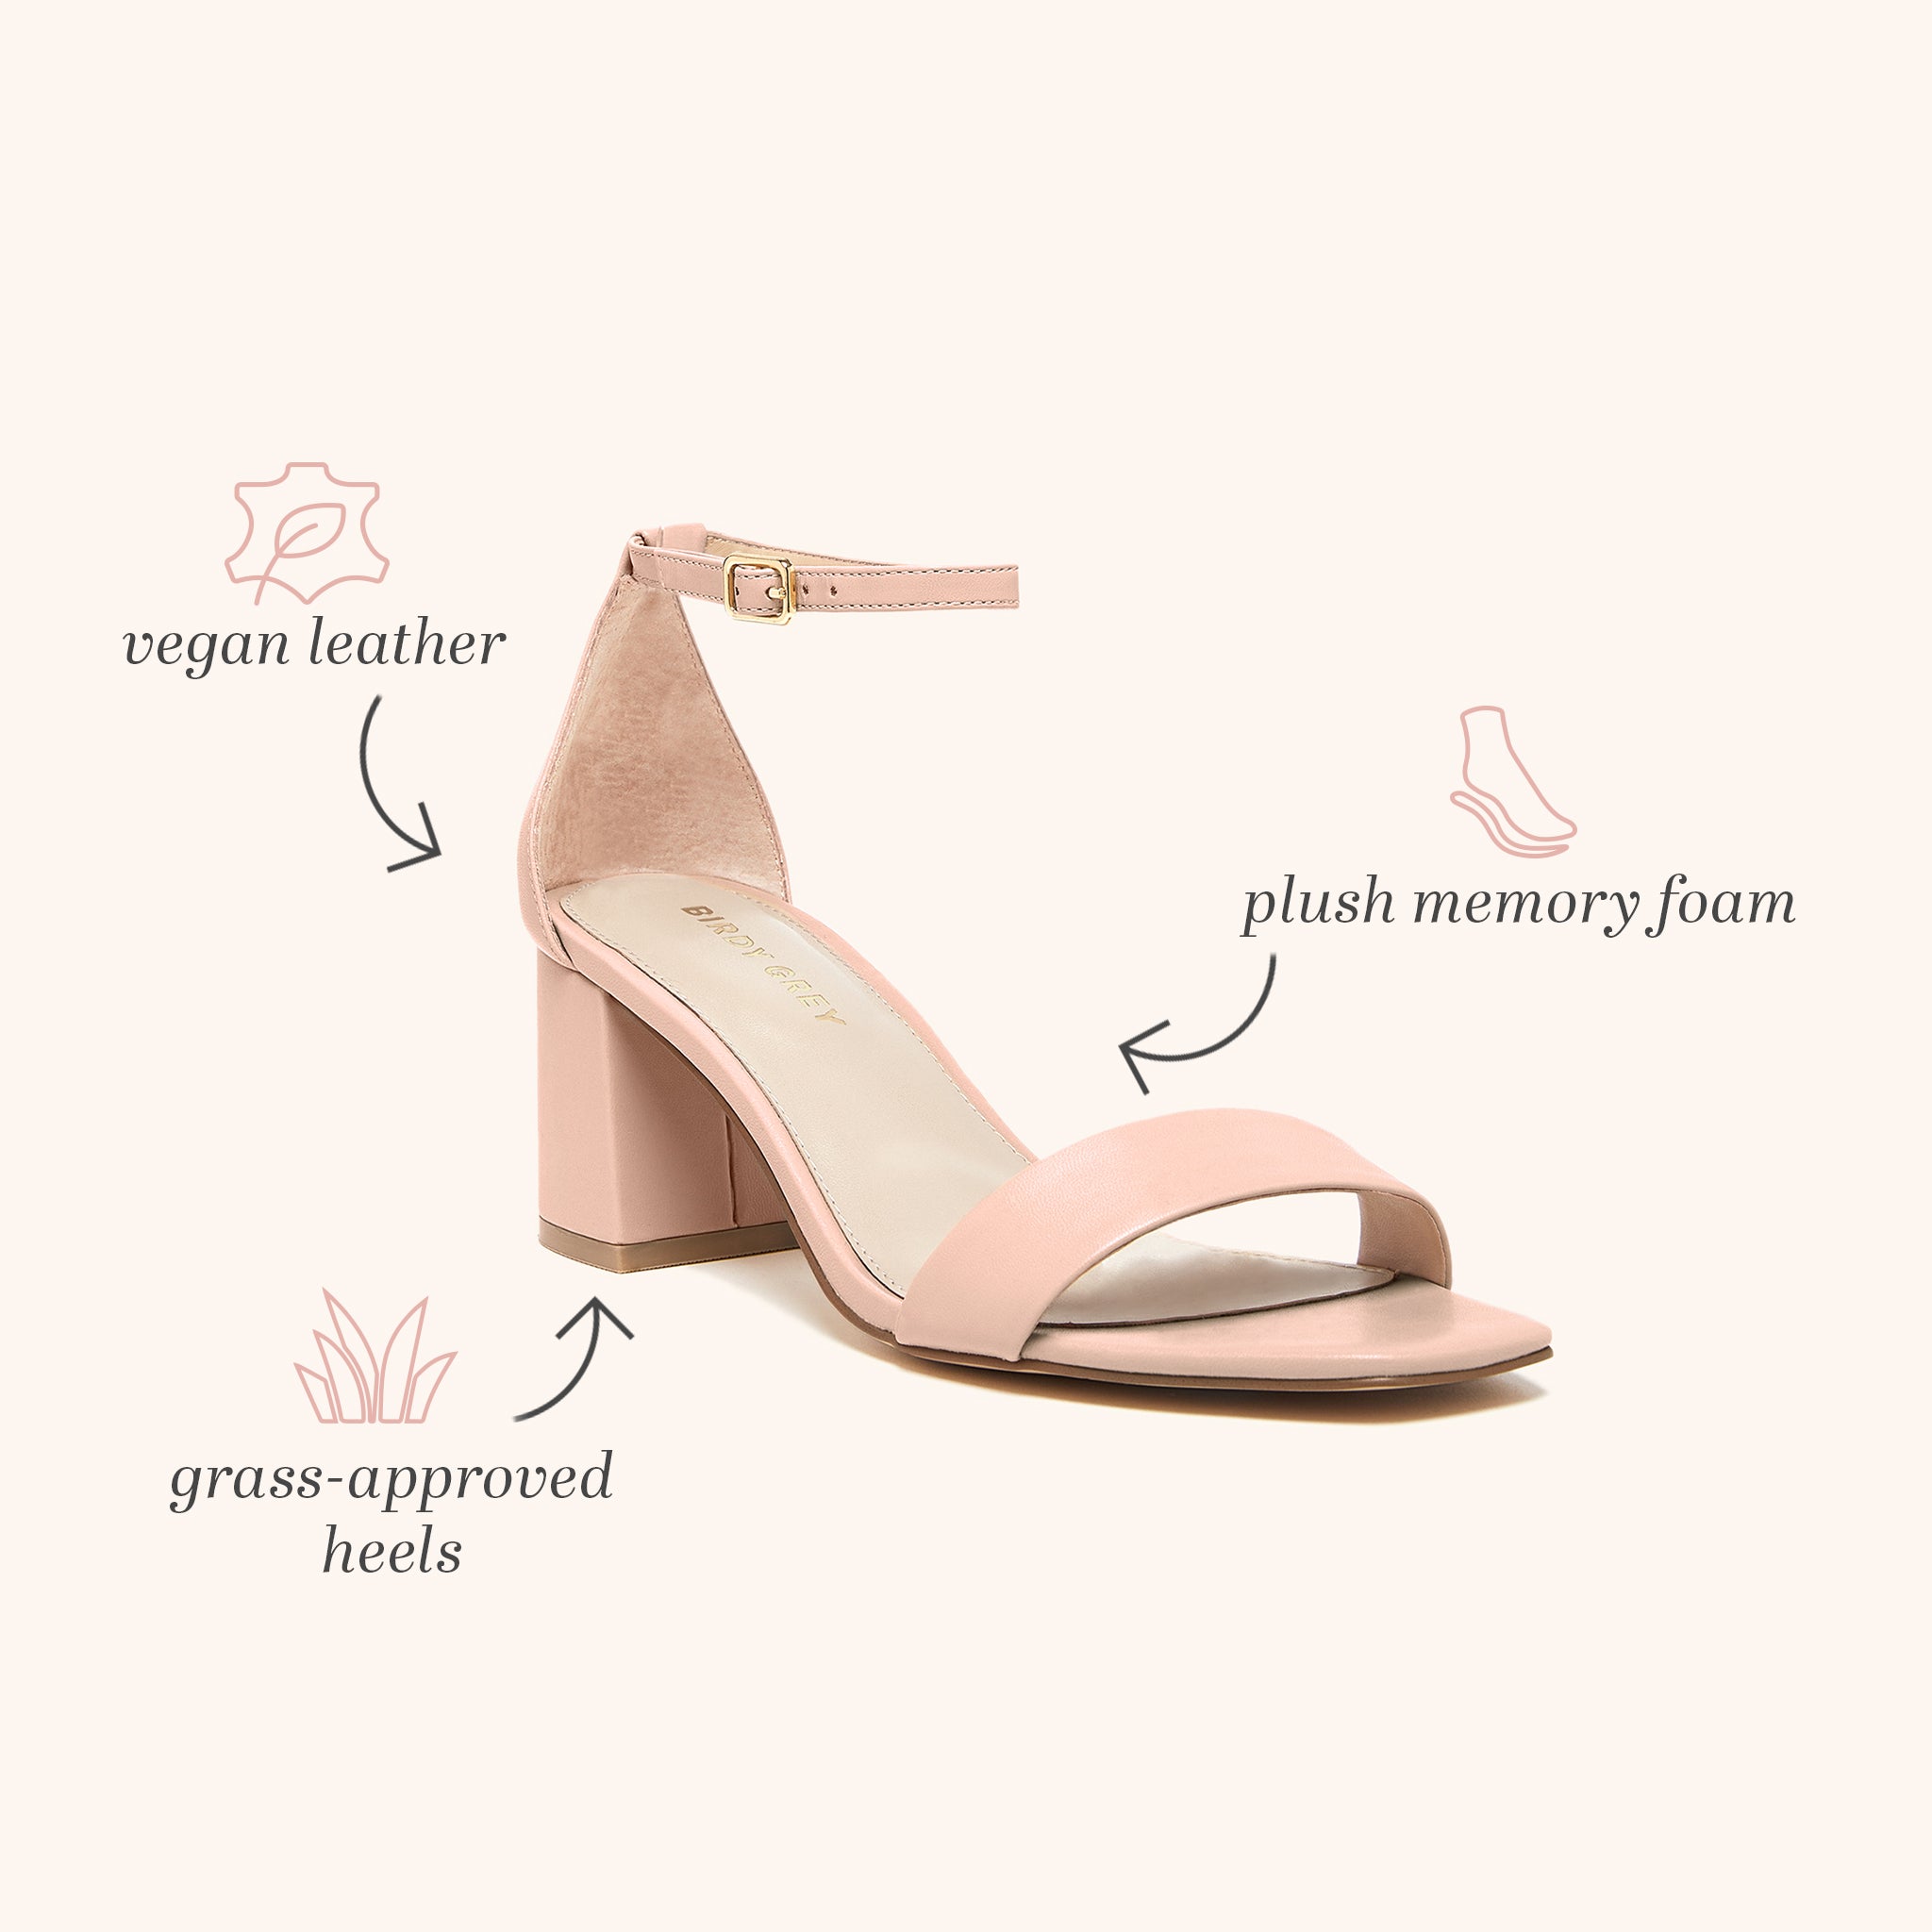 Front side view of the Natalie Chunky Heel shoe in nude blush in vegan leather with arrows and labels pointing to shoe features. An arrow pointing to the shoe is labeled 